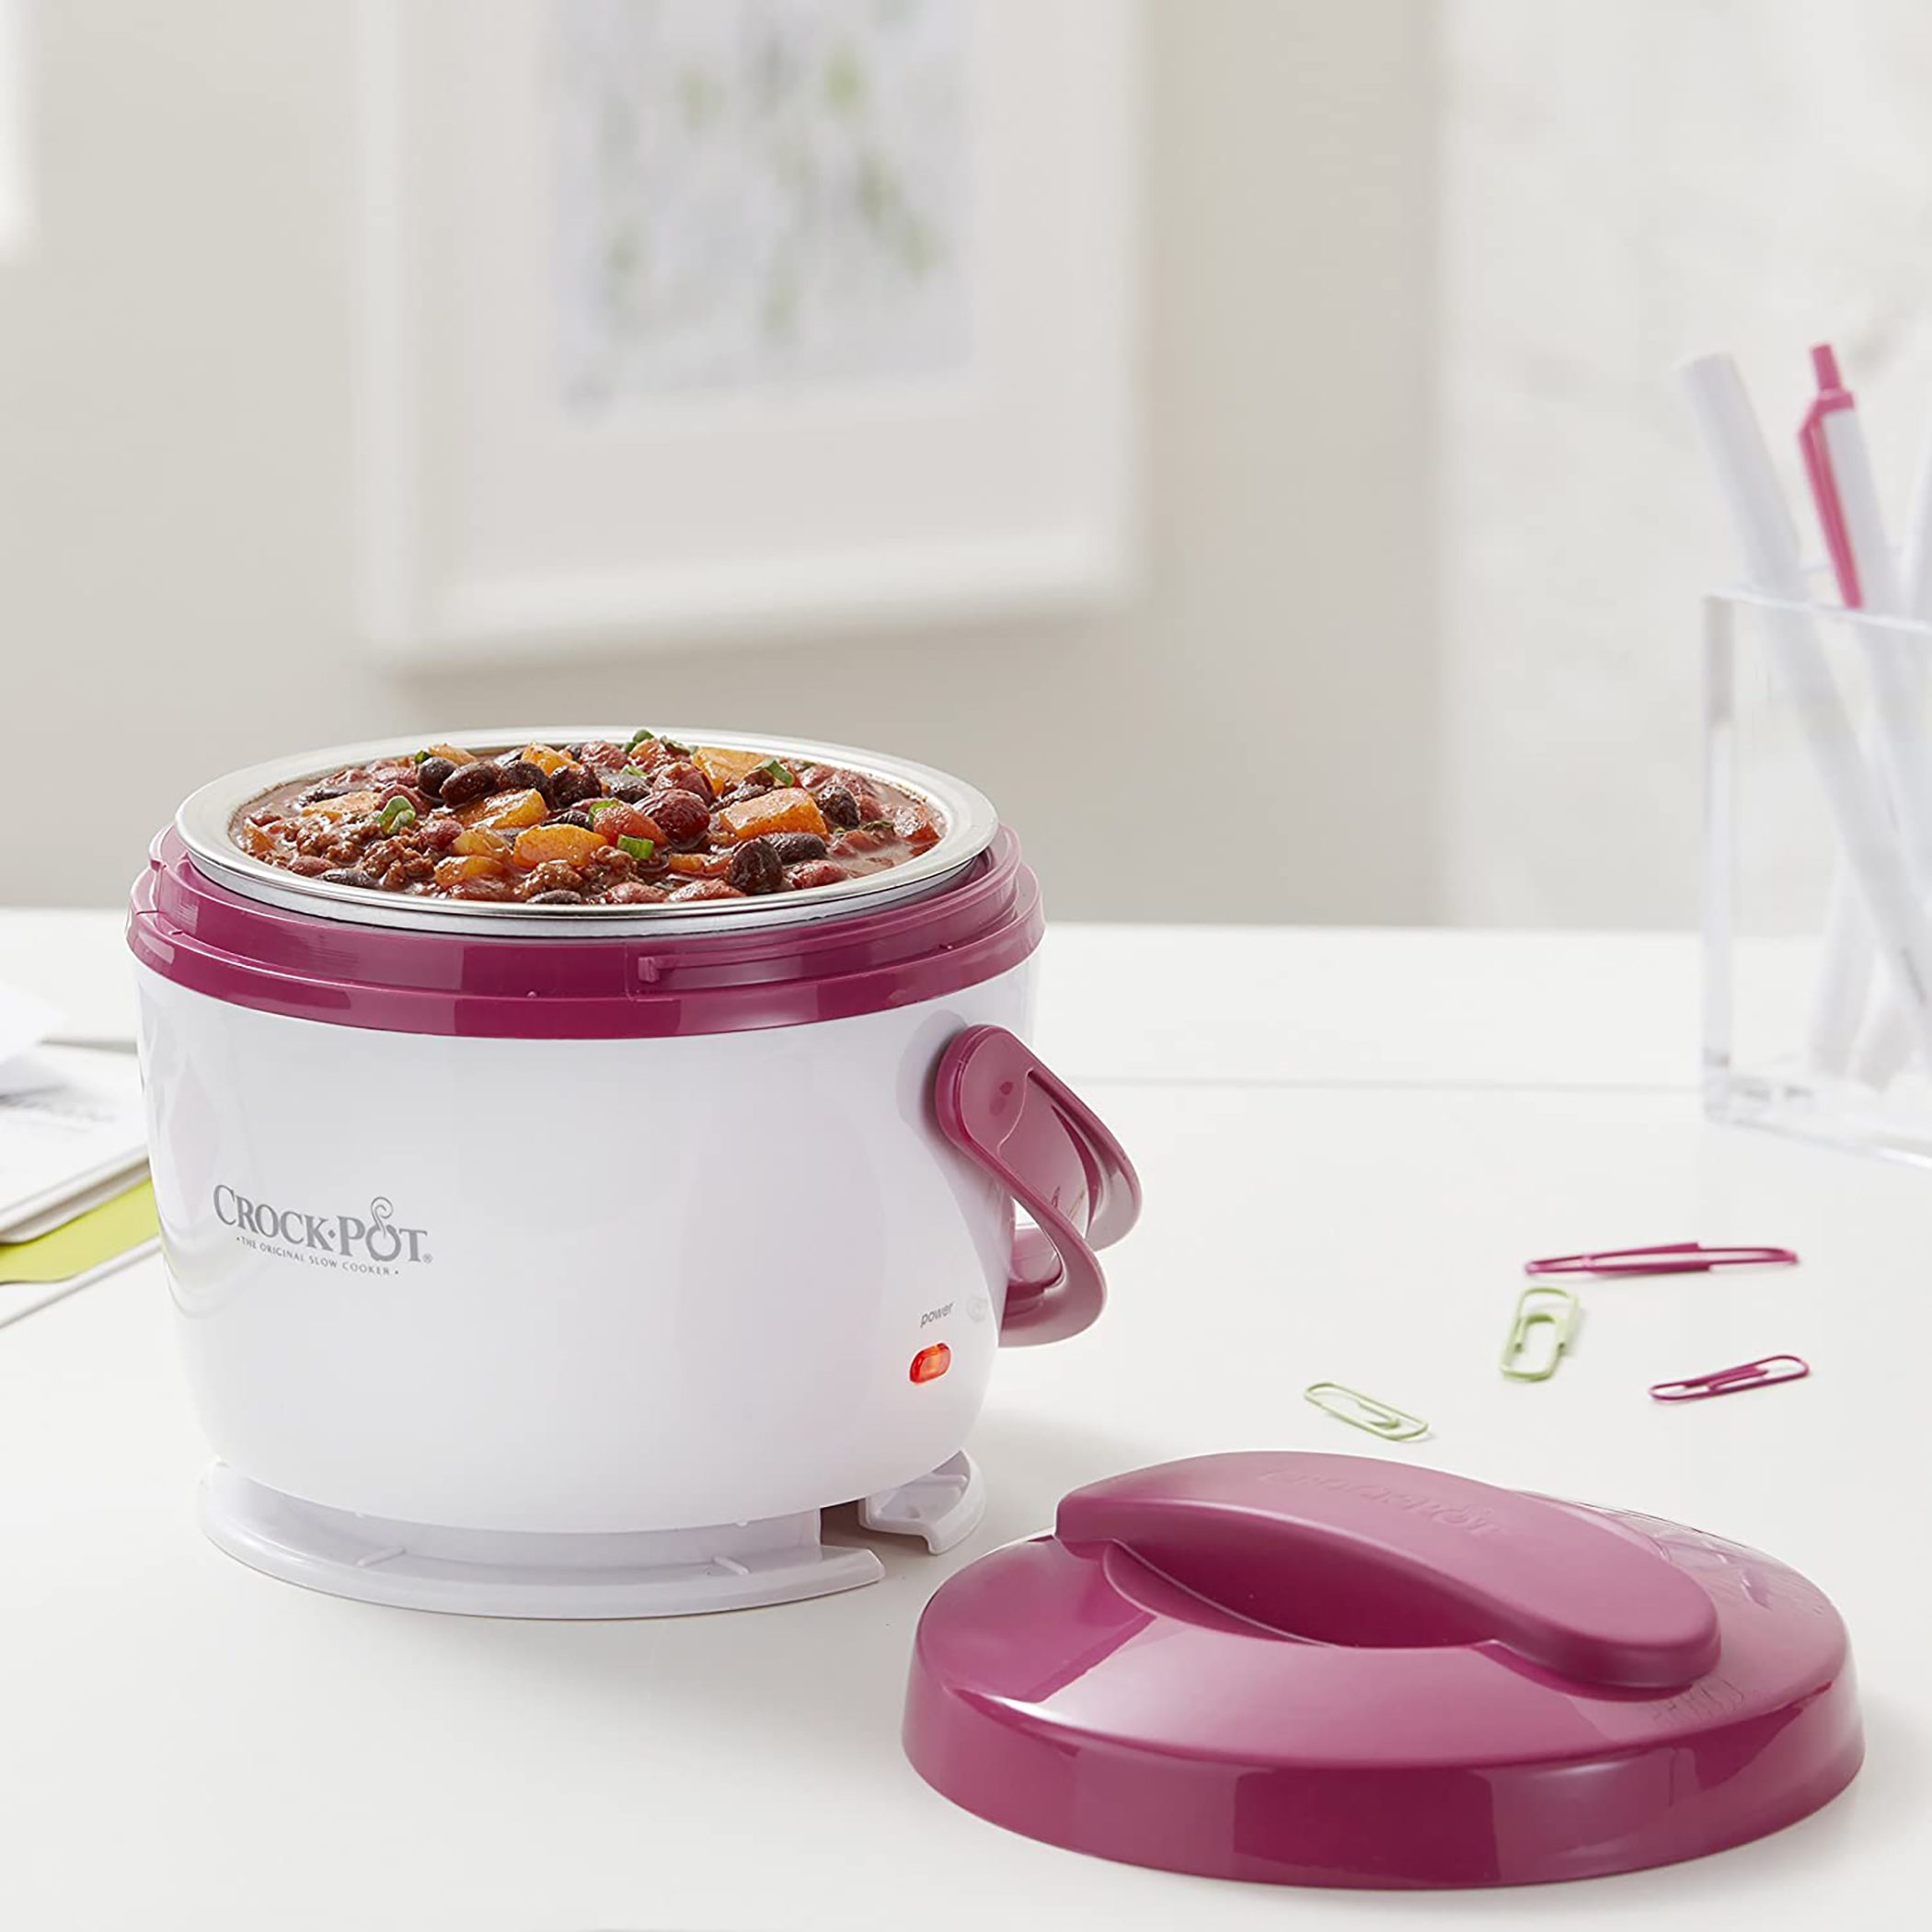 The plug-in lunchbox that cooks your food at your desk